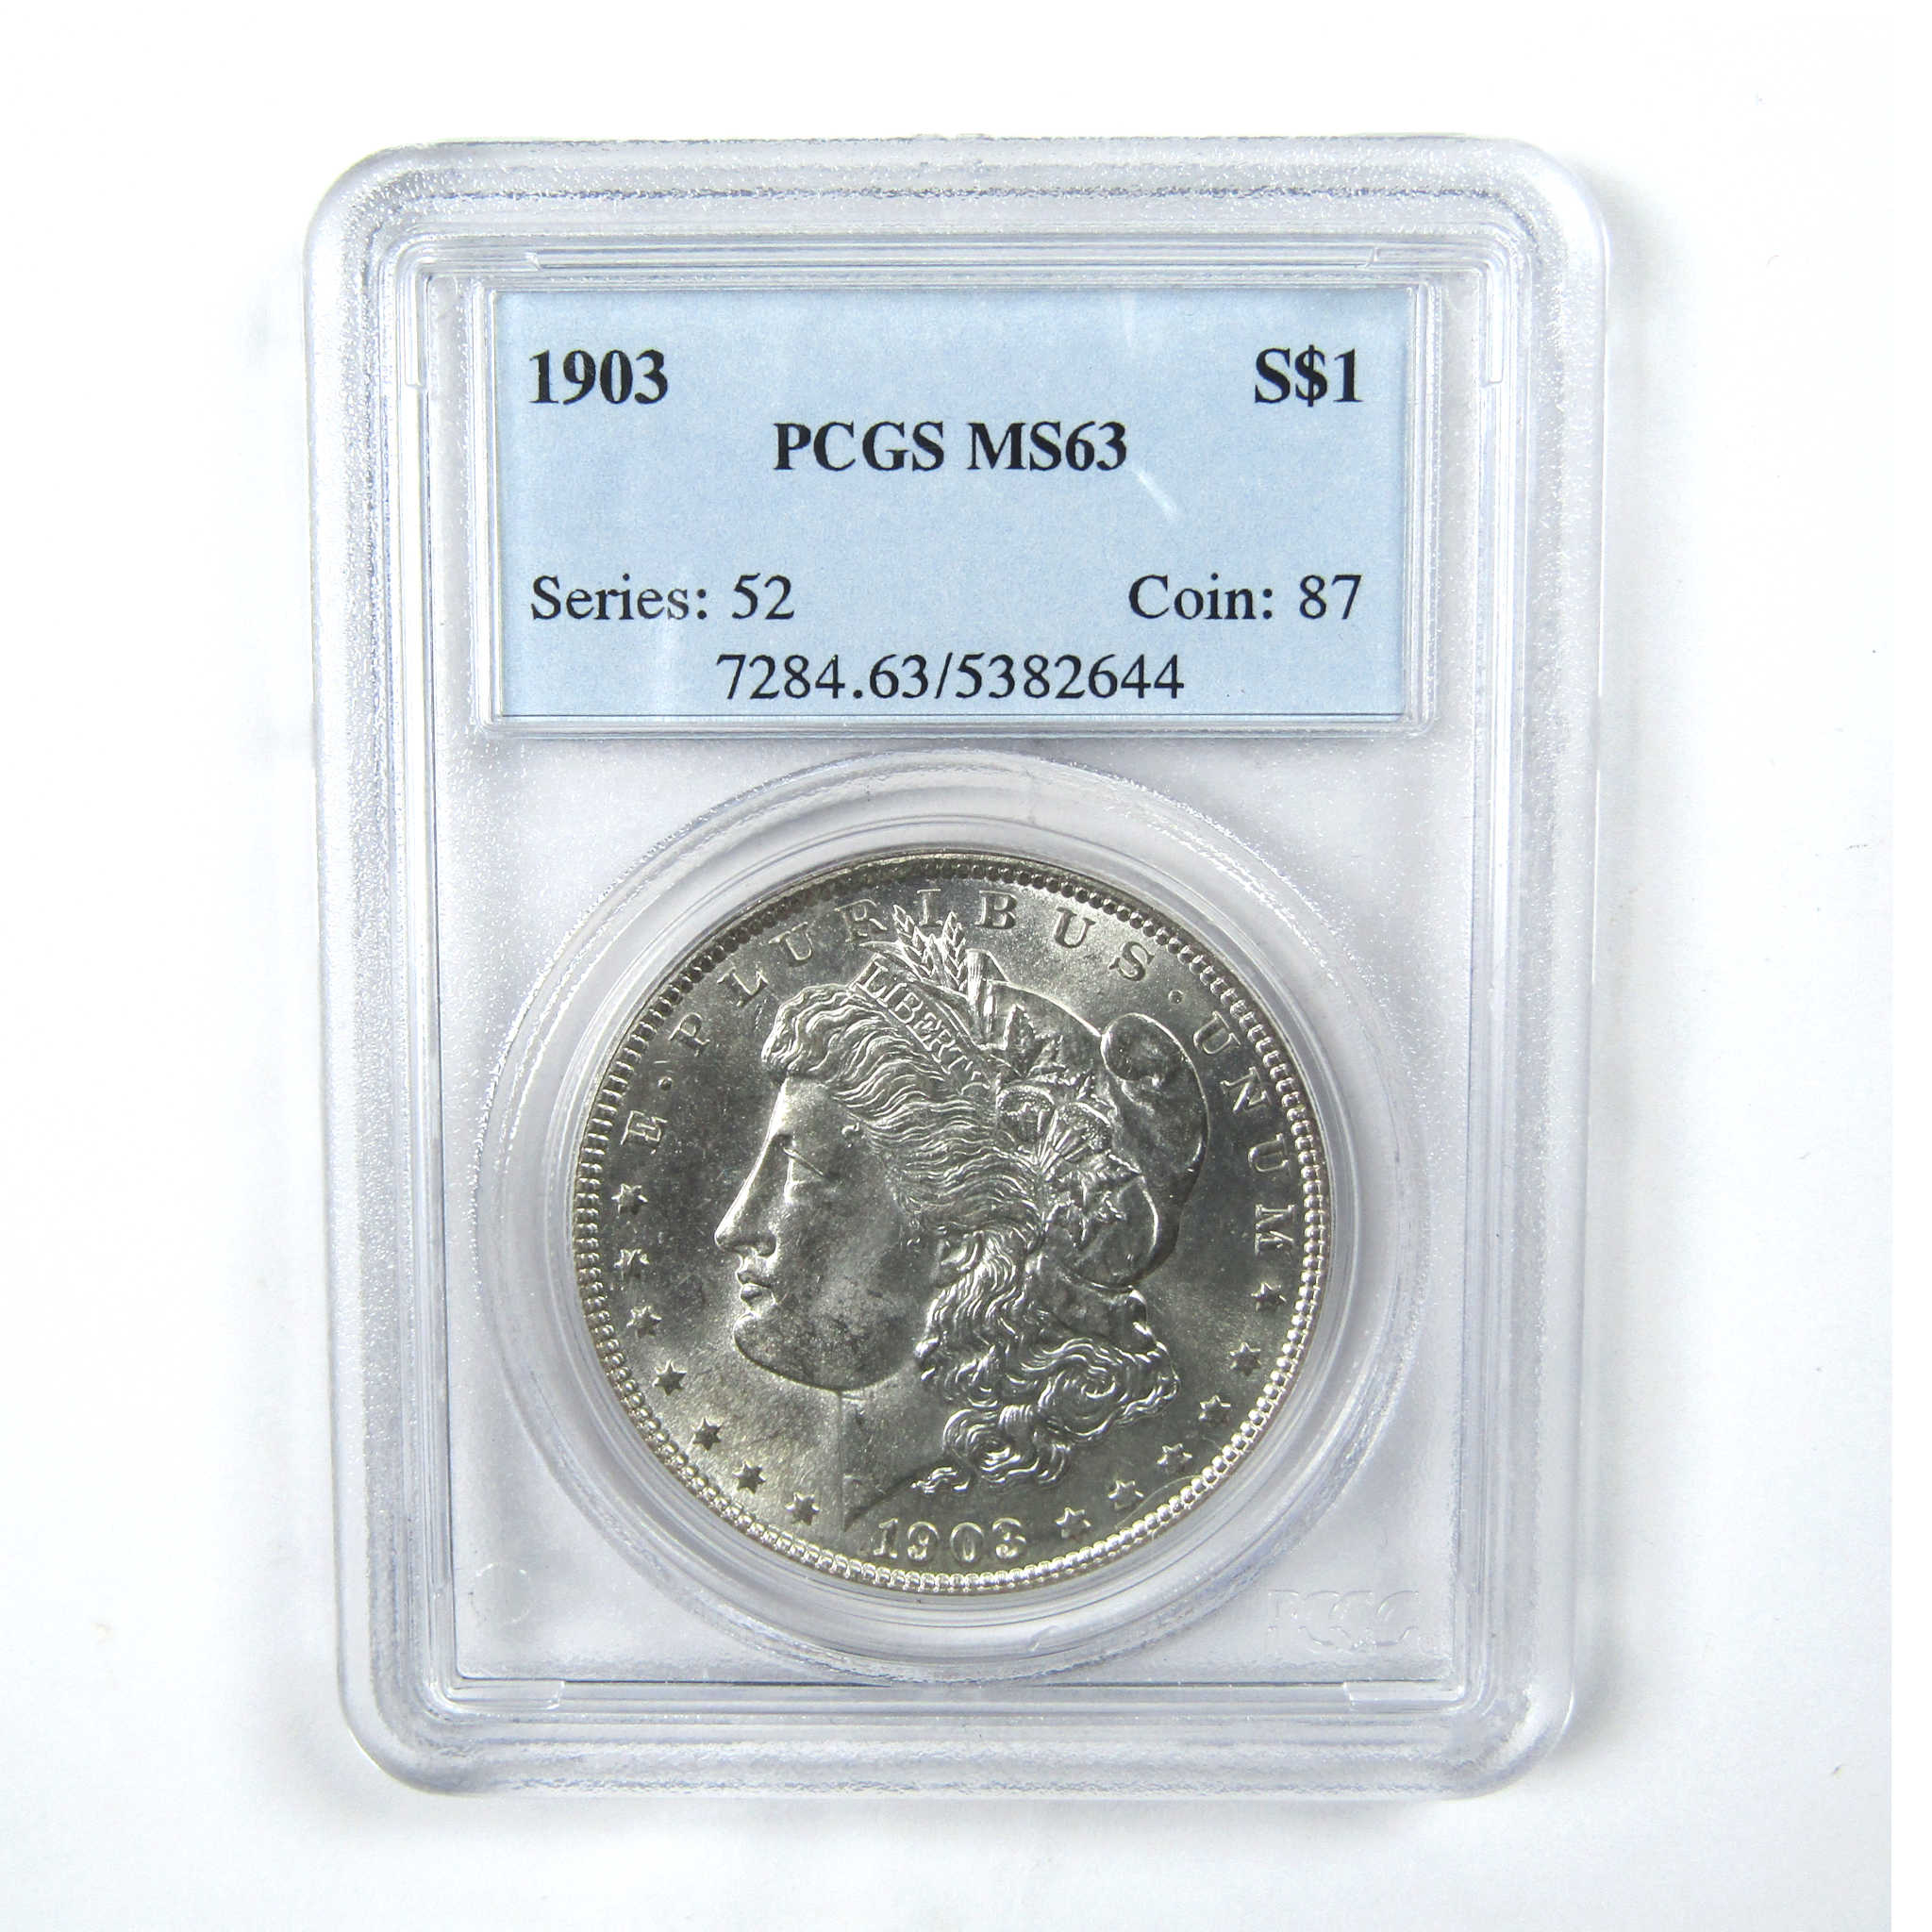 1903 Morgan Dollar MS 63 PCGS Silver $1 Uncirculated Coin SKU:CPC7162 - Morgan coin - Morgan silver dollar - Morgan silver dollar for sale - Profile Coins &amp; Collectibles